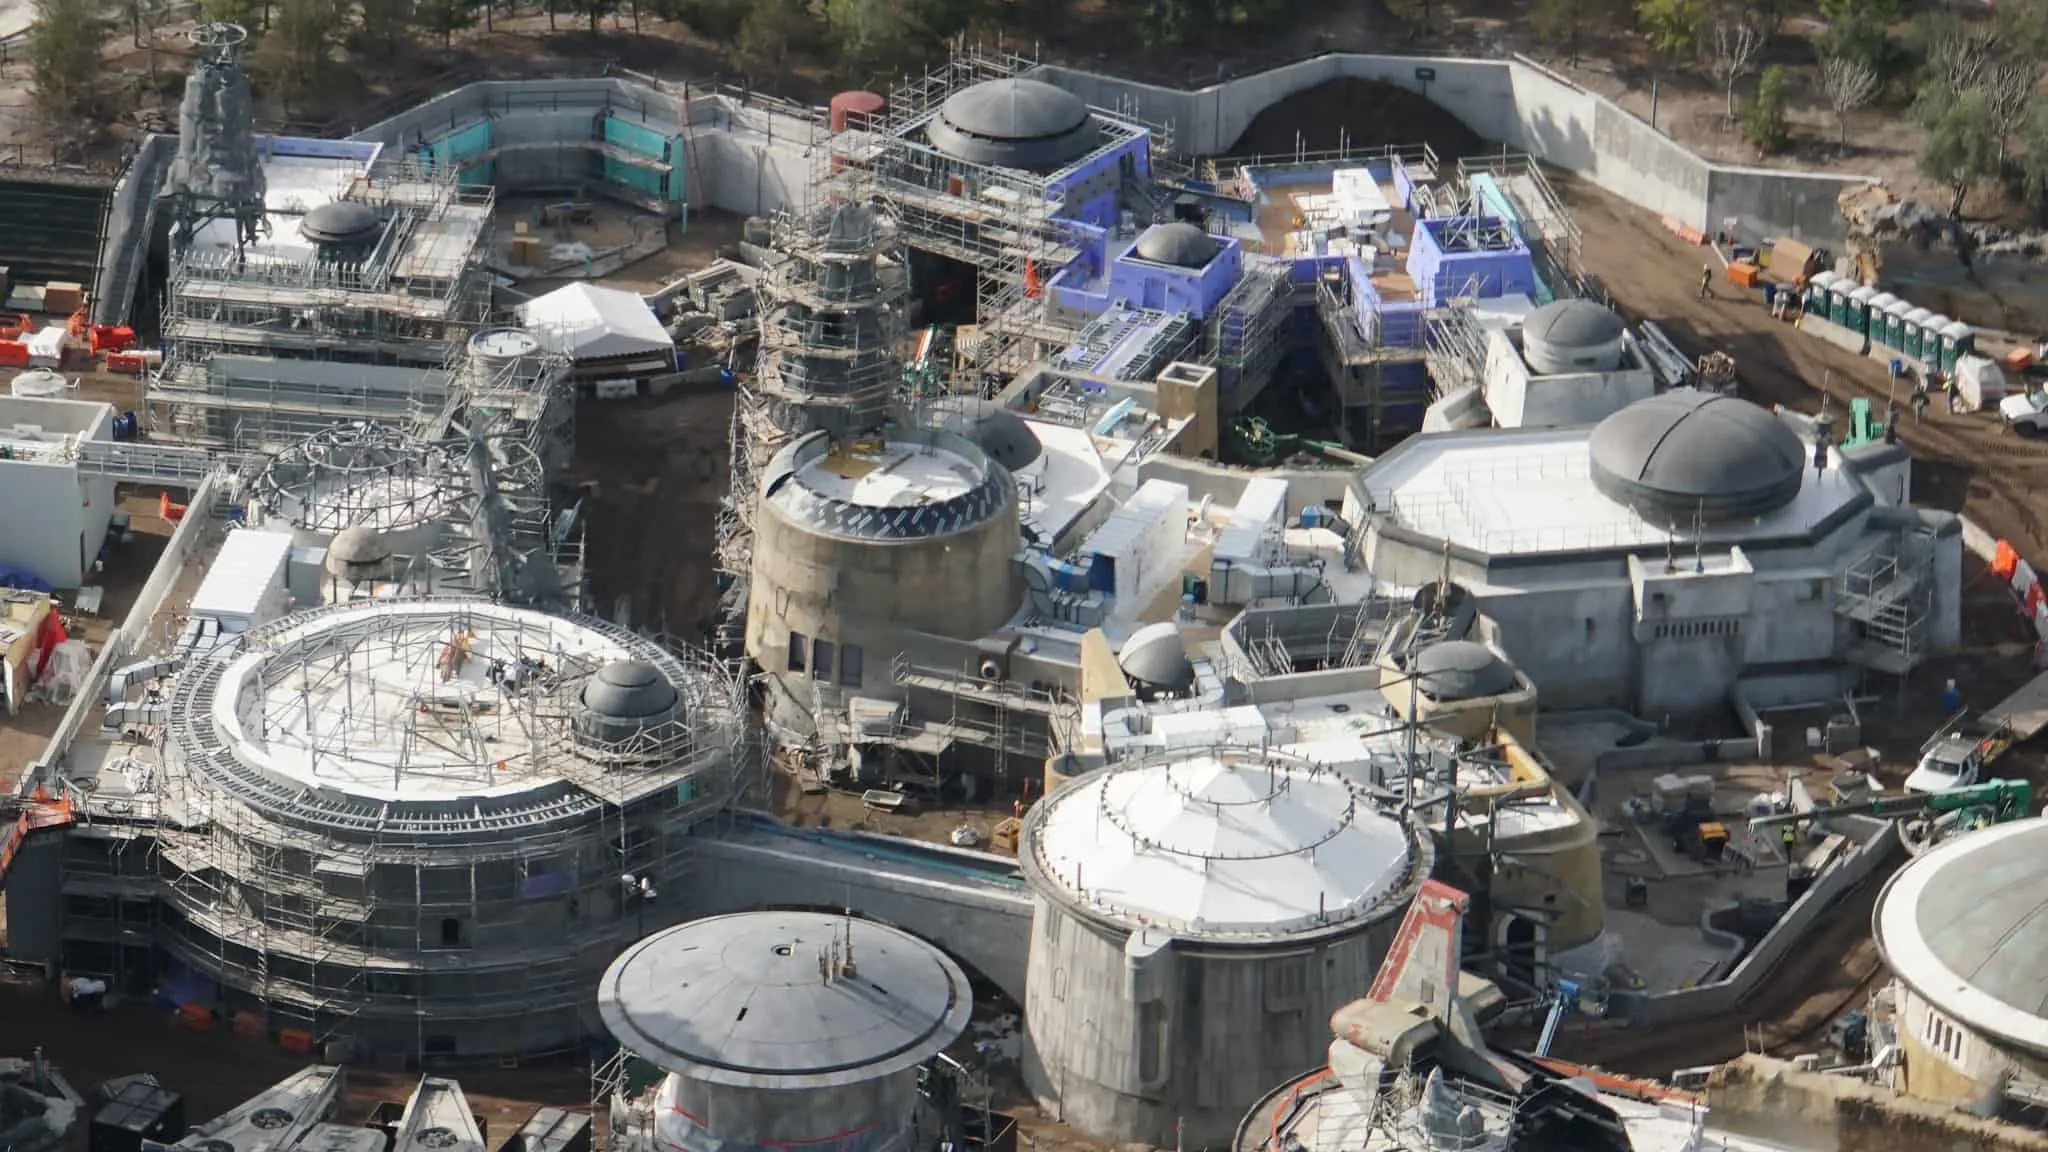 Galaxy's Edge Update February 2019 Black Spire Outpost buildings